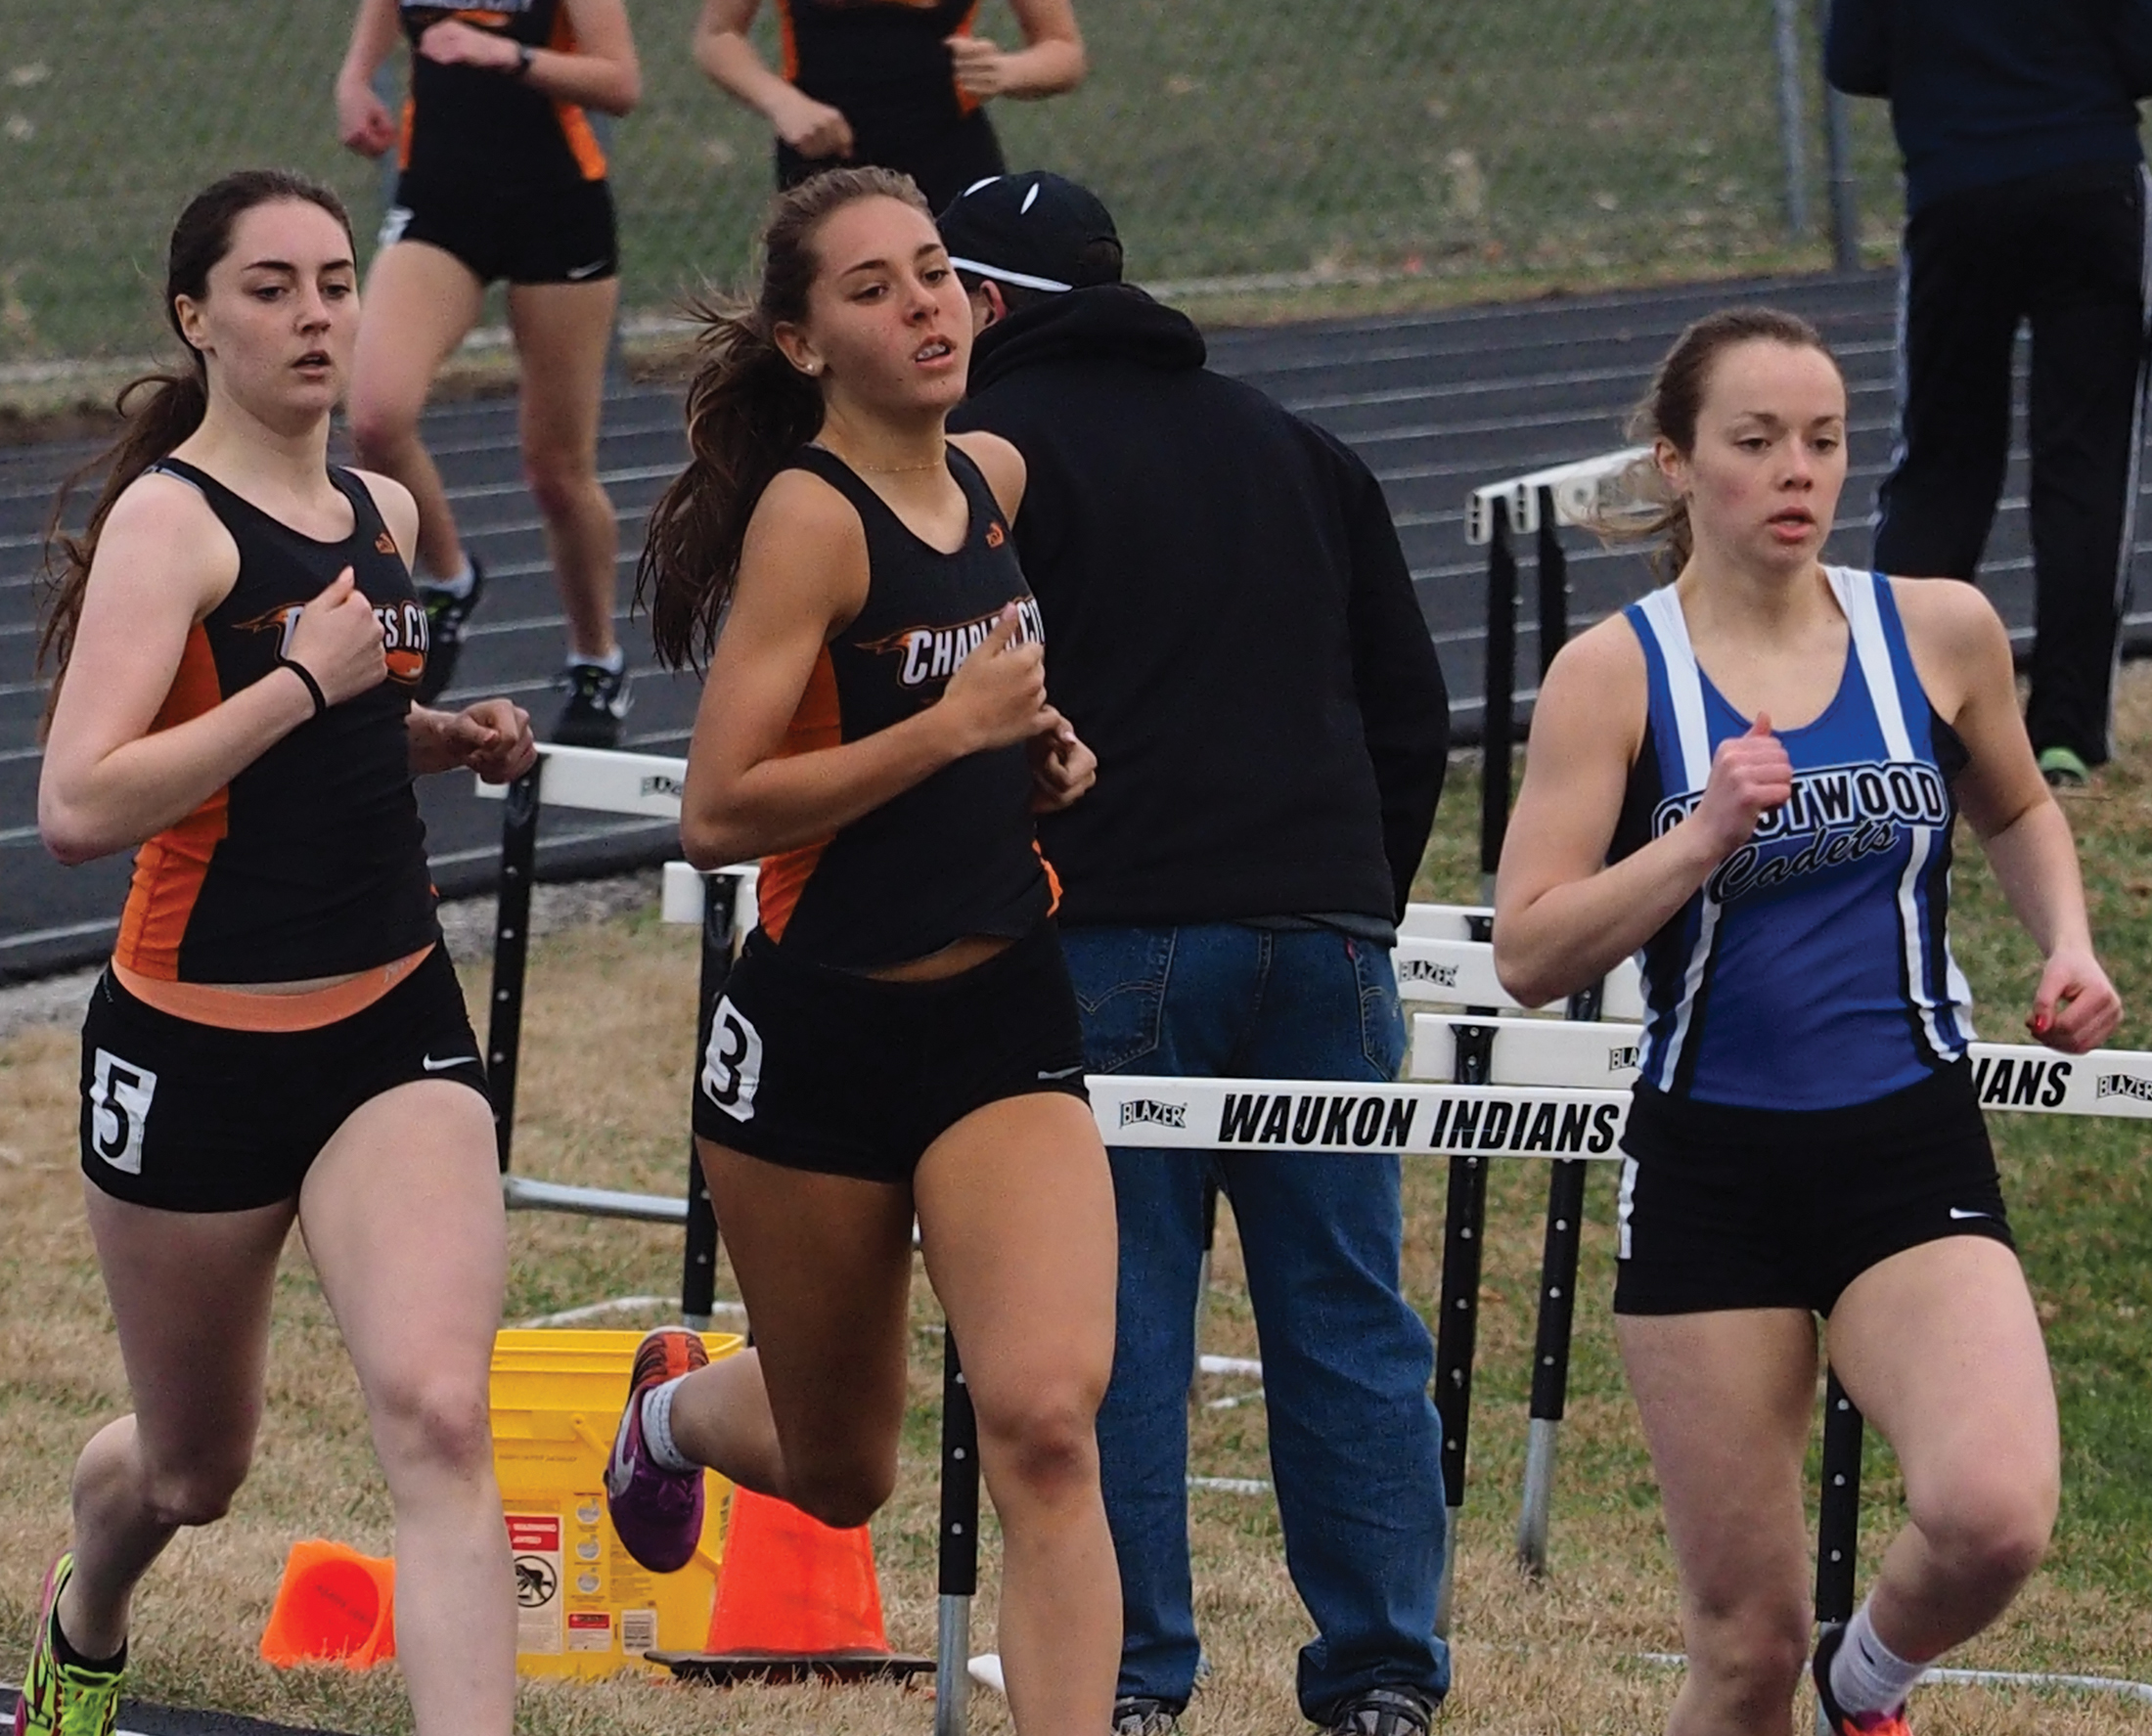 Comet girls place third at Waukon Indians Relays